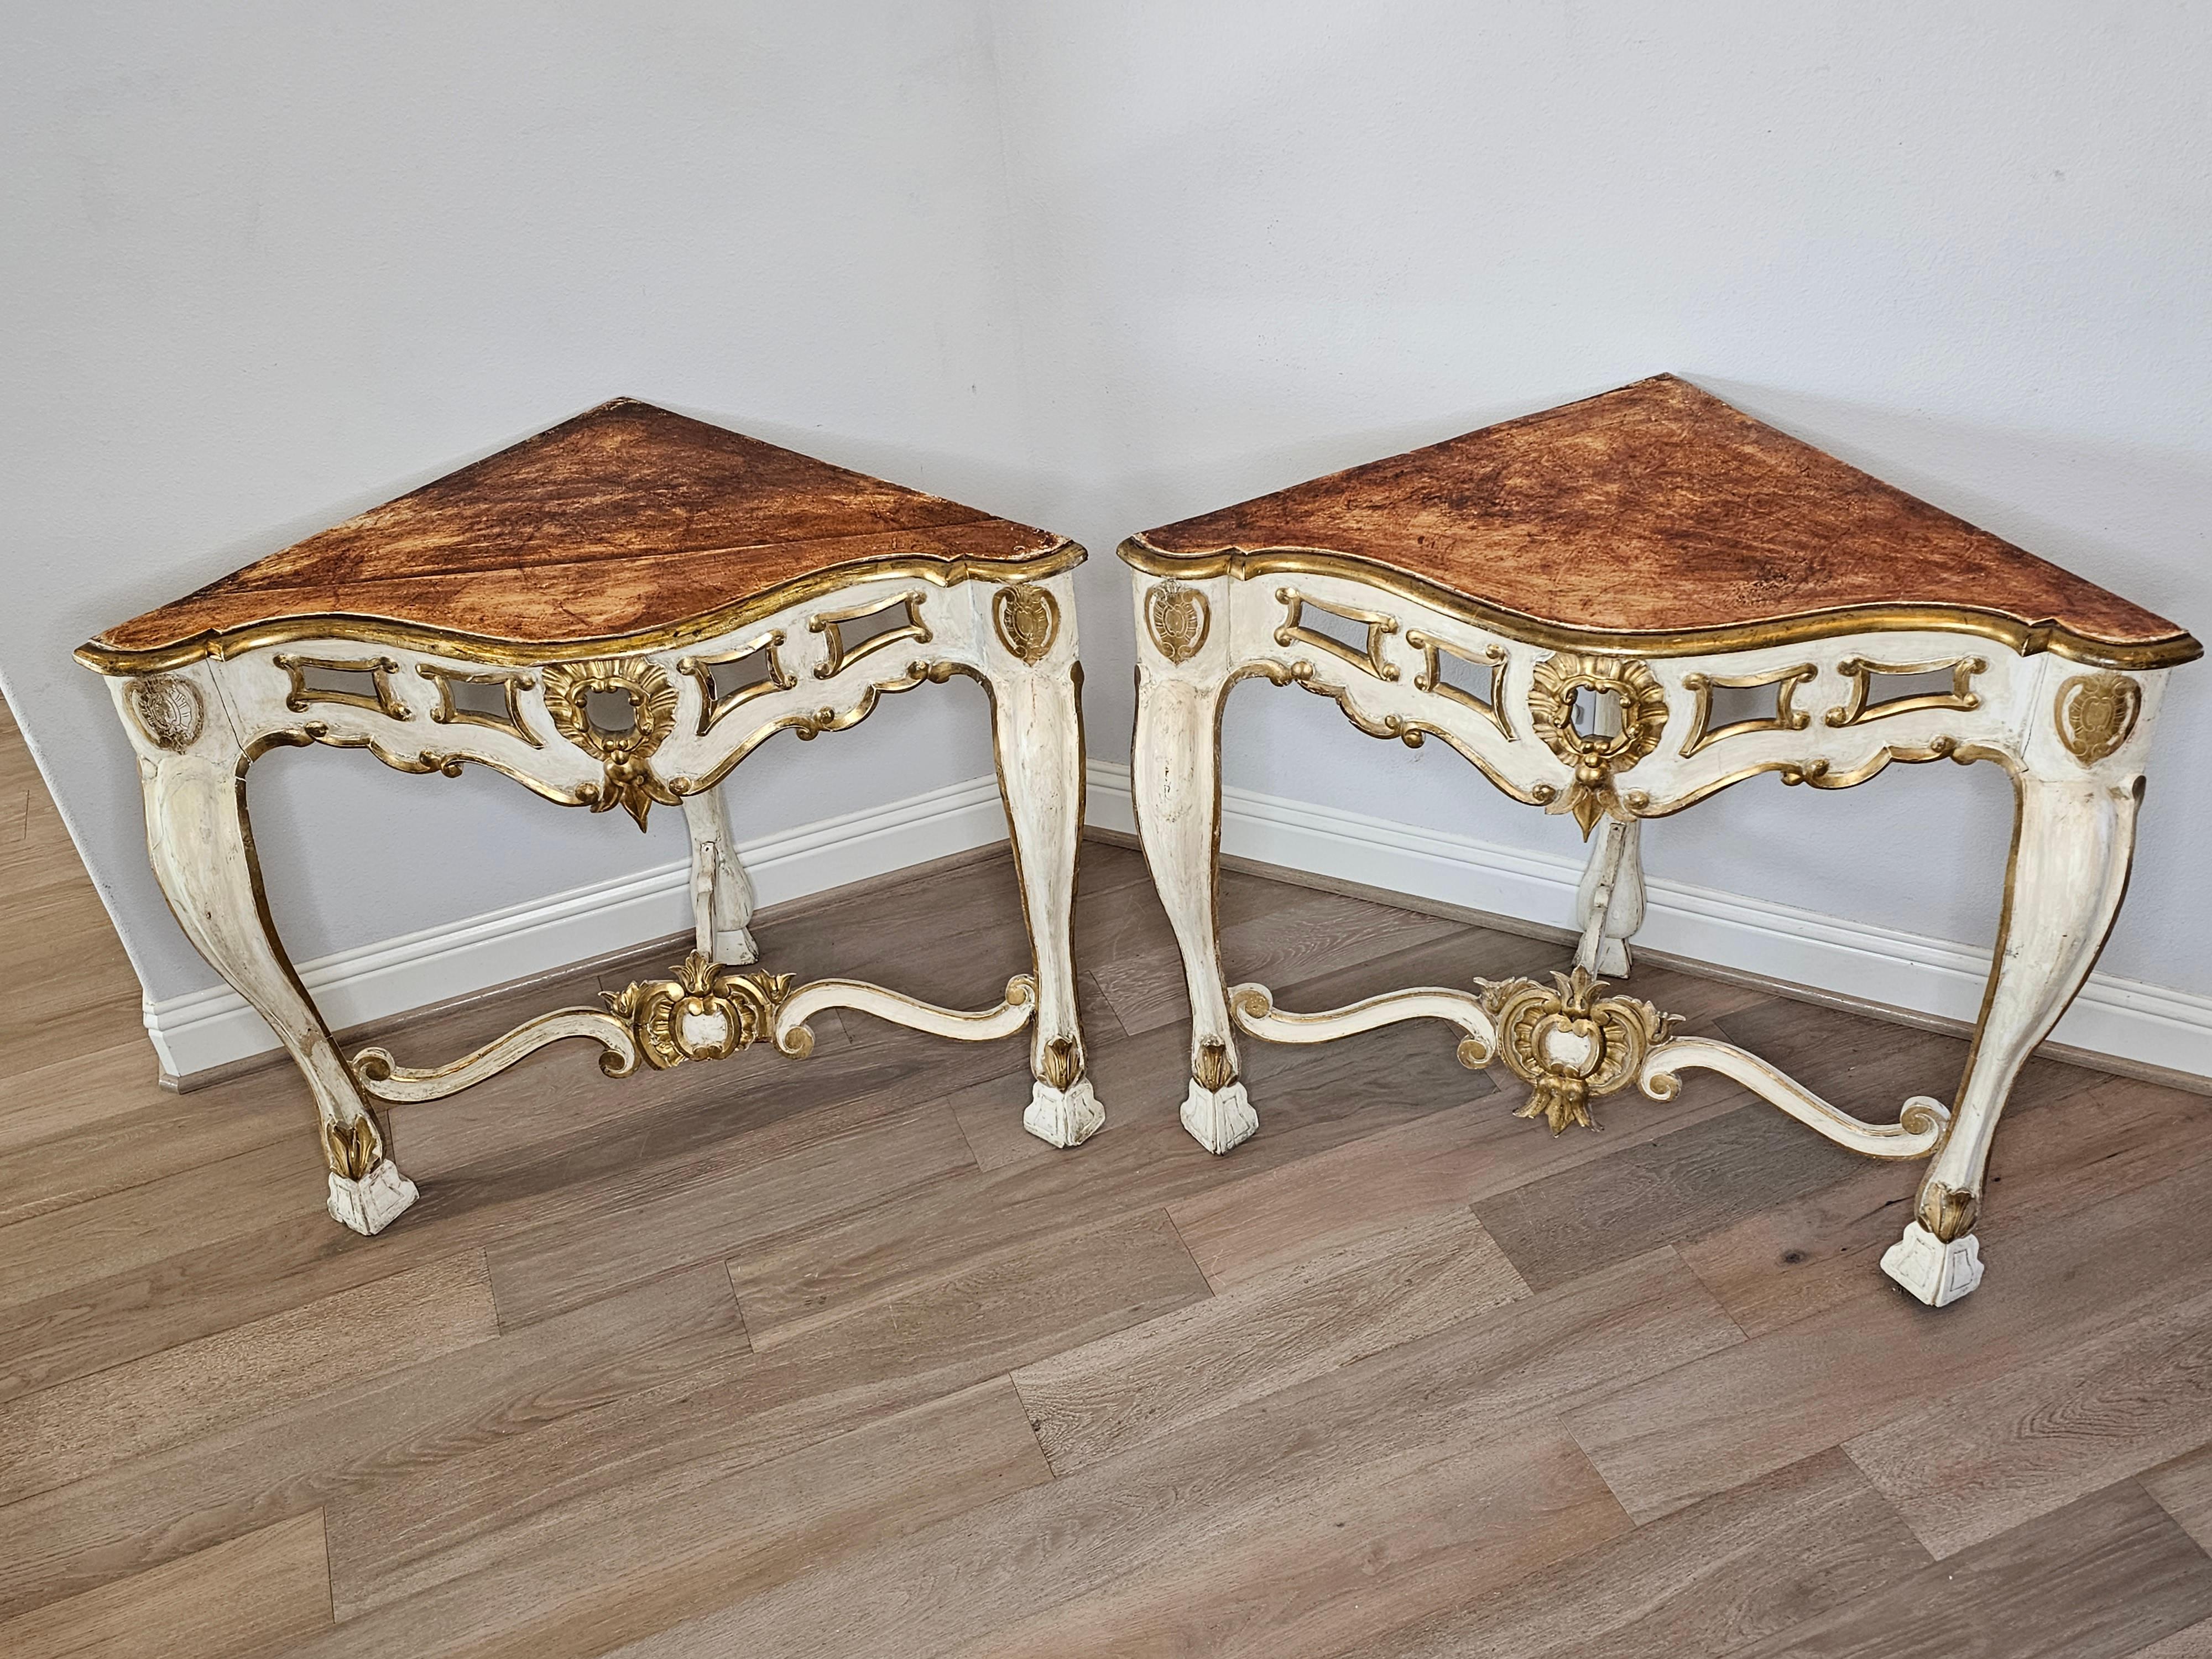 18th Century Italian Louis XV Carved Painted Gilt Wood Corner Console Table Pair In Distressed Condition For Sale In Forney, TX